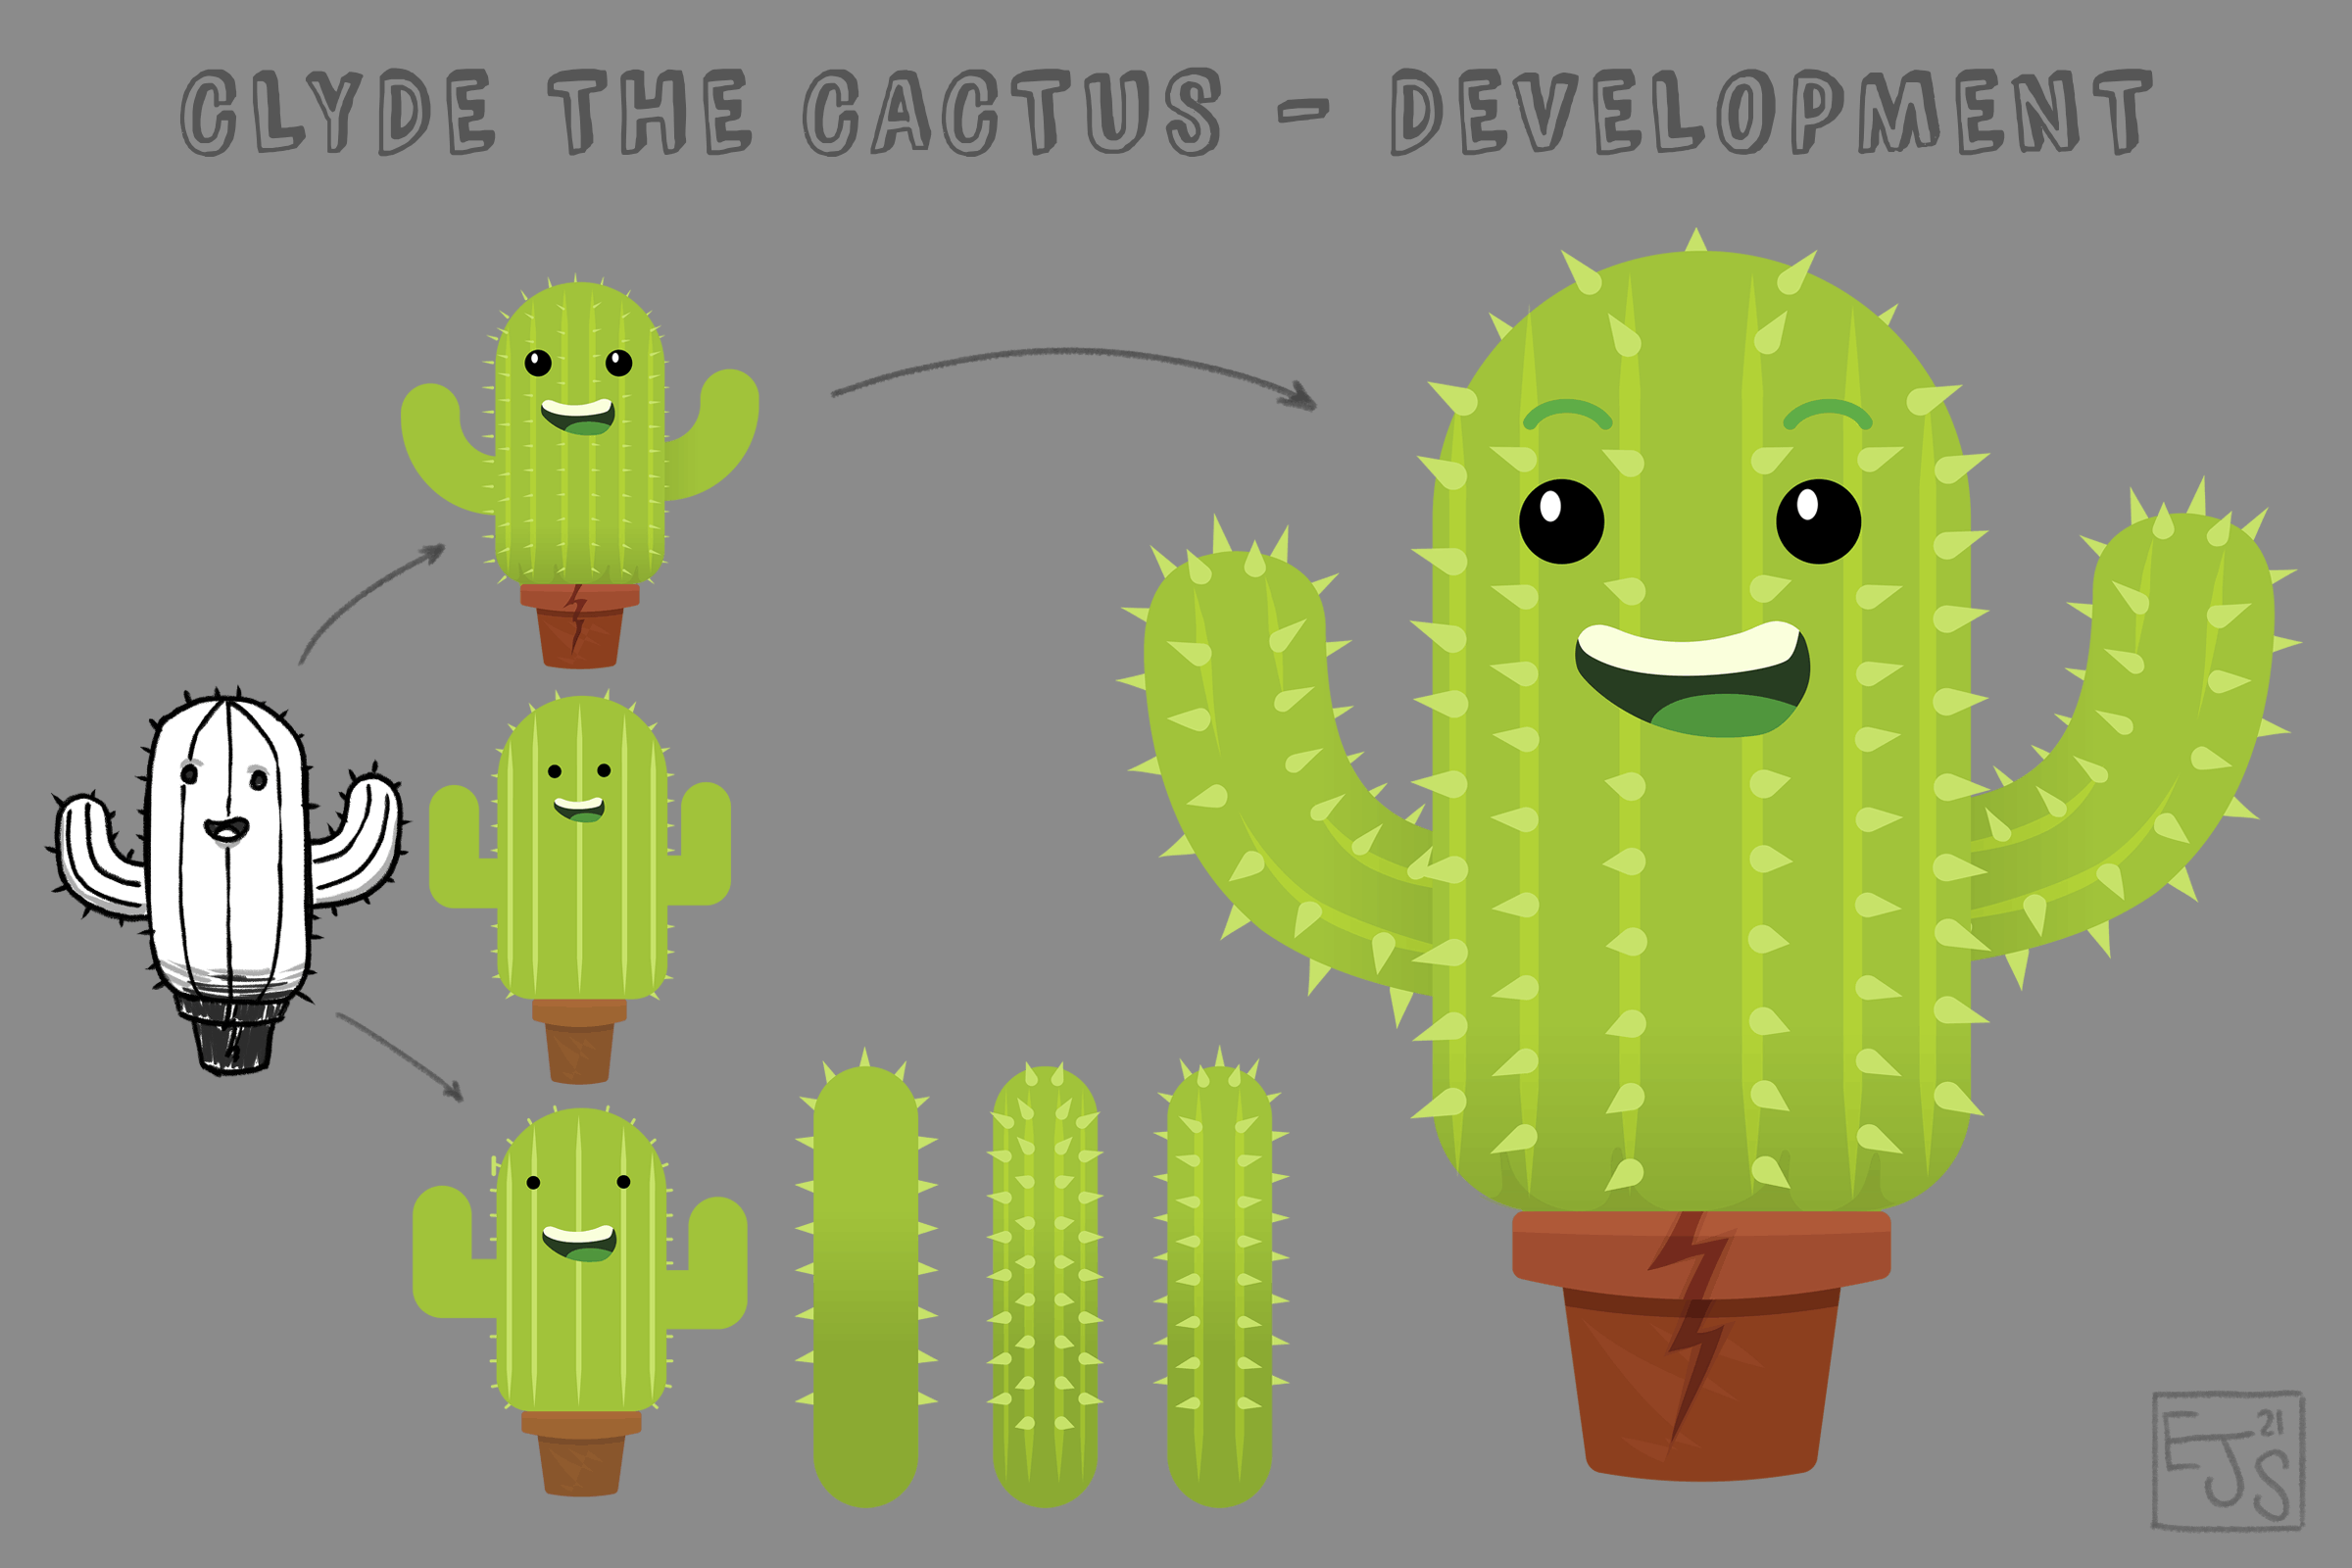 Clyde the Cactus